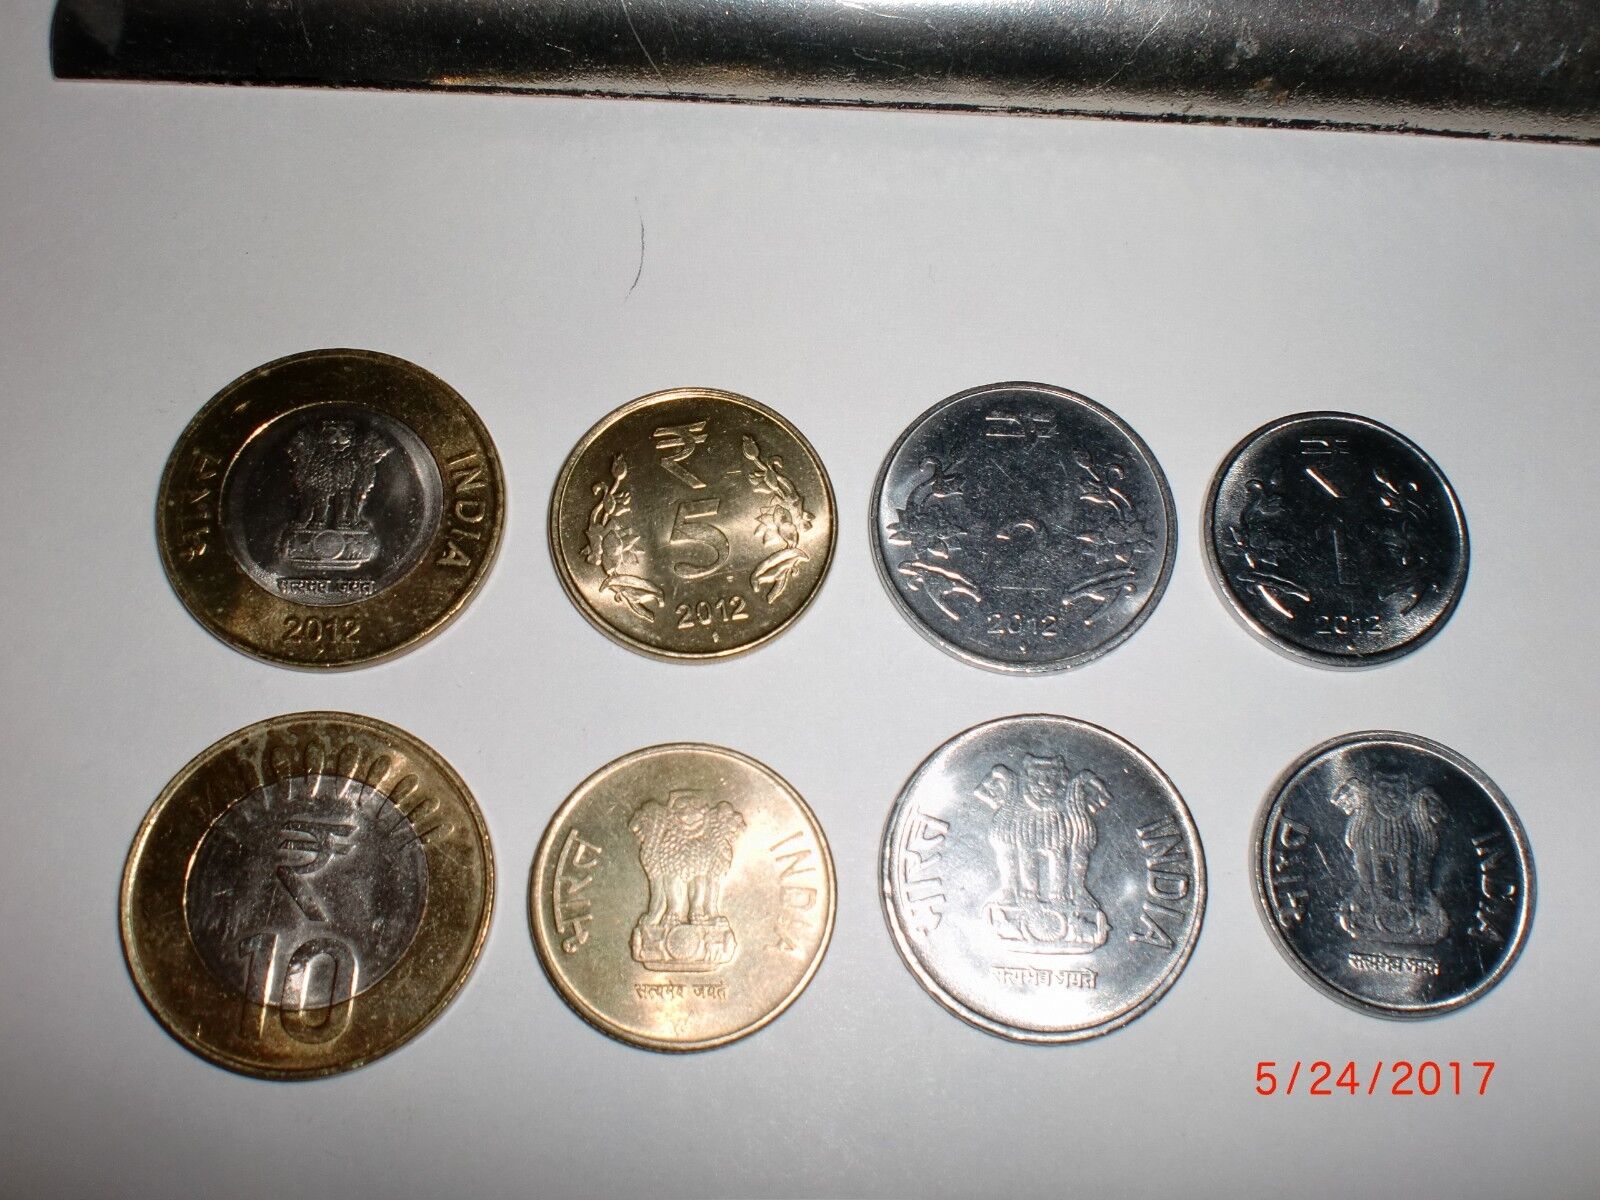 - INDIA - 4 NEW COINS -RS.10,5,2,1 - 2012(WITH 